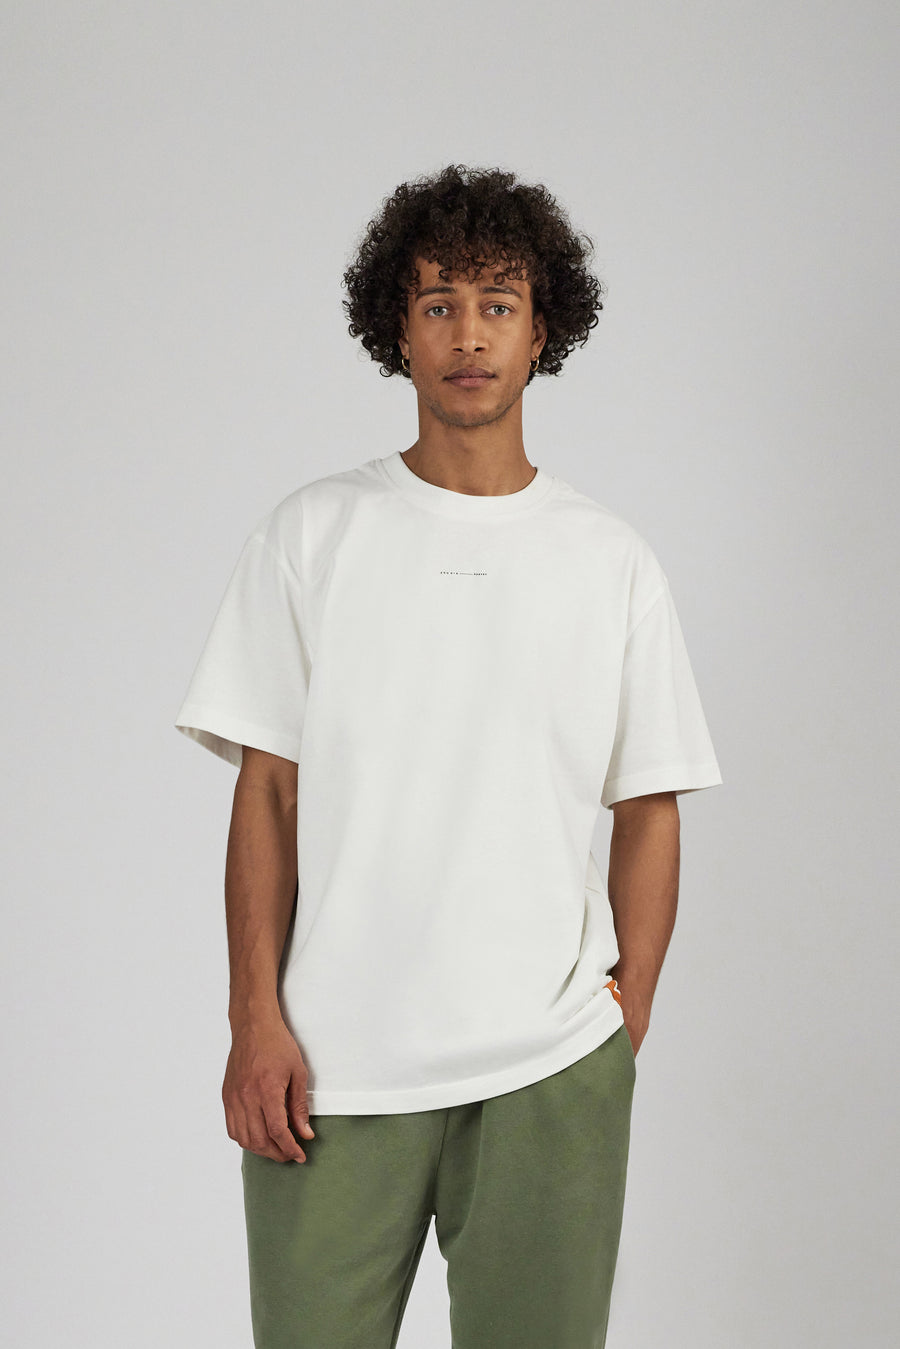 Man wearing an oversized unisex T-Shirt in color white